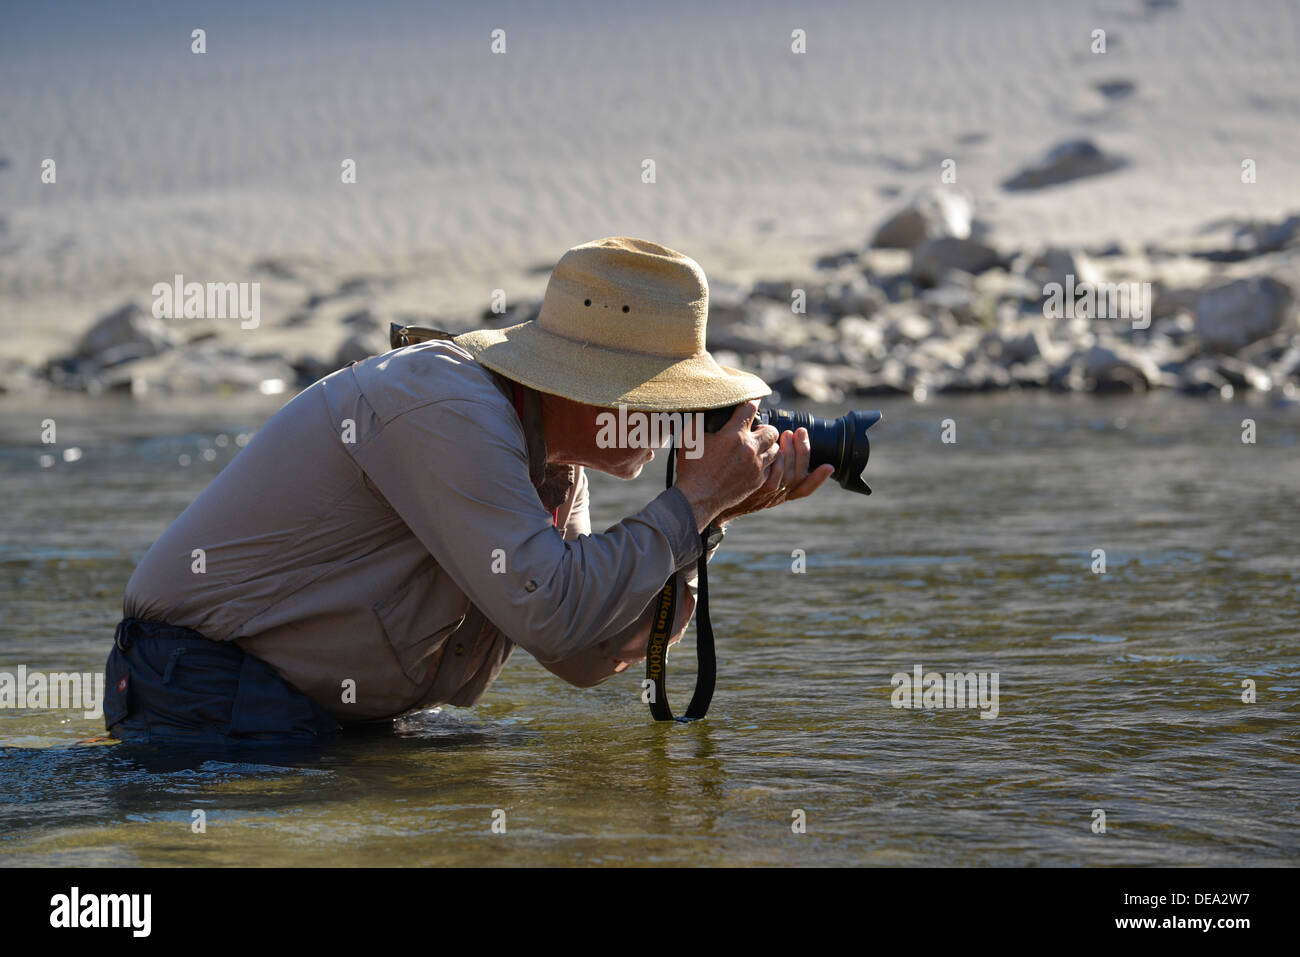 Photographer taking a picture while partially immersed in the Snake River, Hells Canyon, Oregon/Idaho. Stock Photo